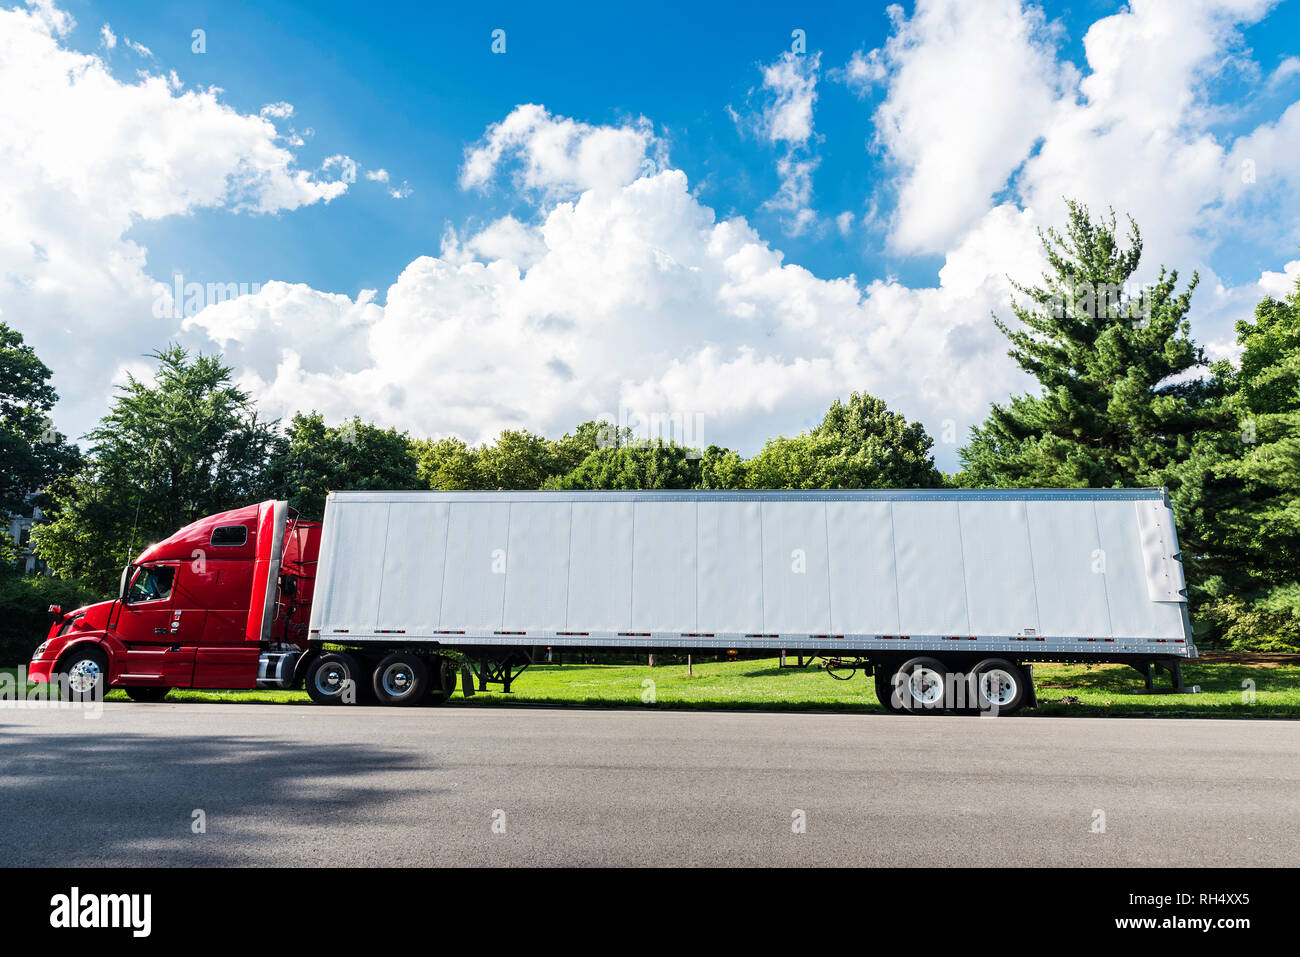 Heavy red and white truck equipped with refrigeration goods parked in a Central Park, Manhattan, New York City, USA Stock Photo